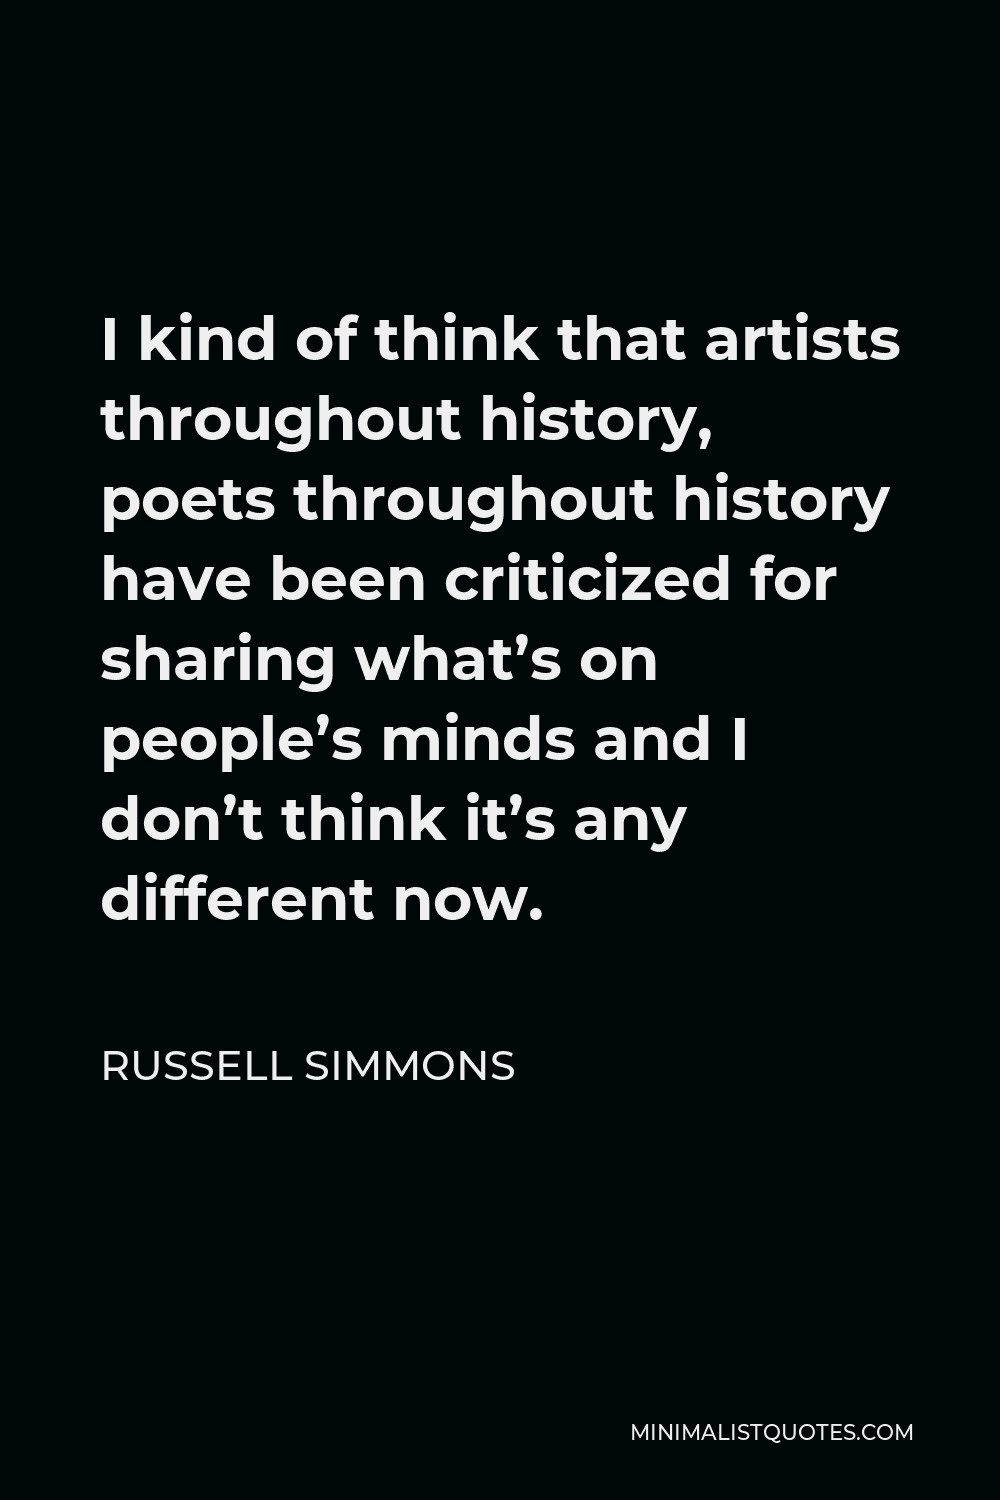 Russell Simmons Quote - I kind of think that artists throughout history, poets throughout history have been criticized for sharing what’s on people’s minds and I don’t think it’s any different now.